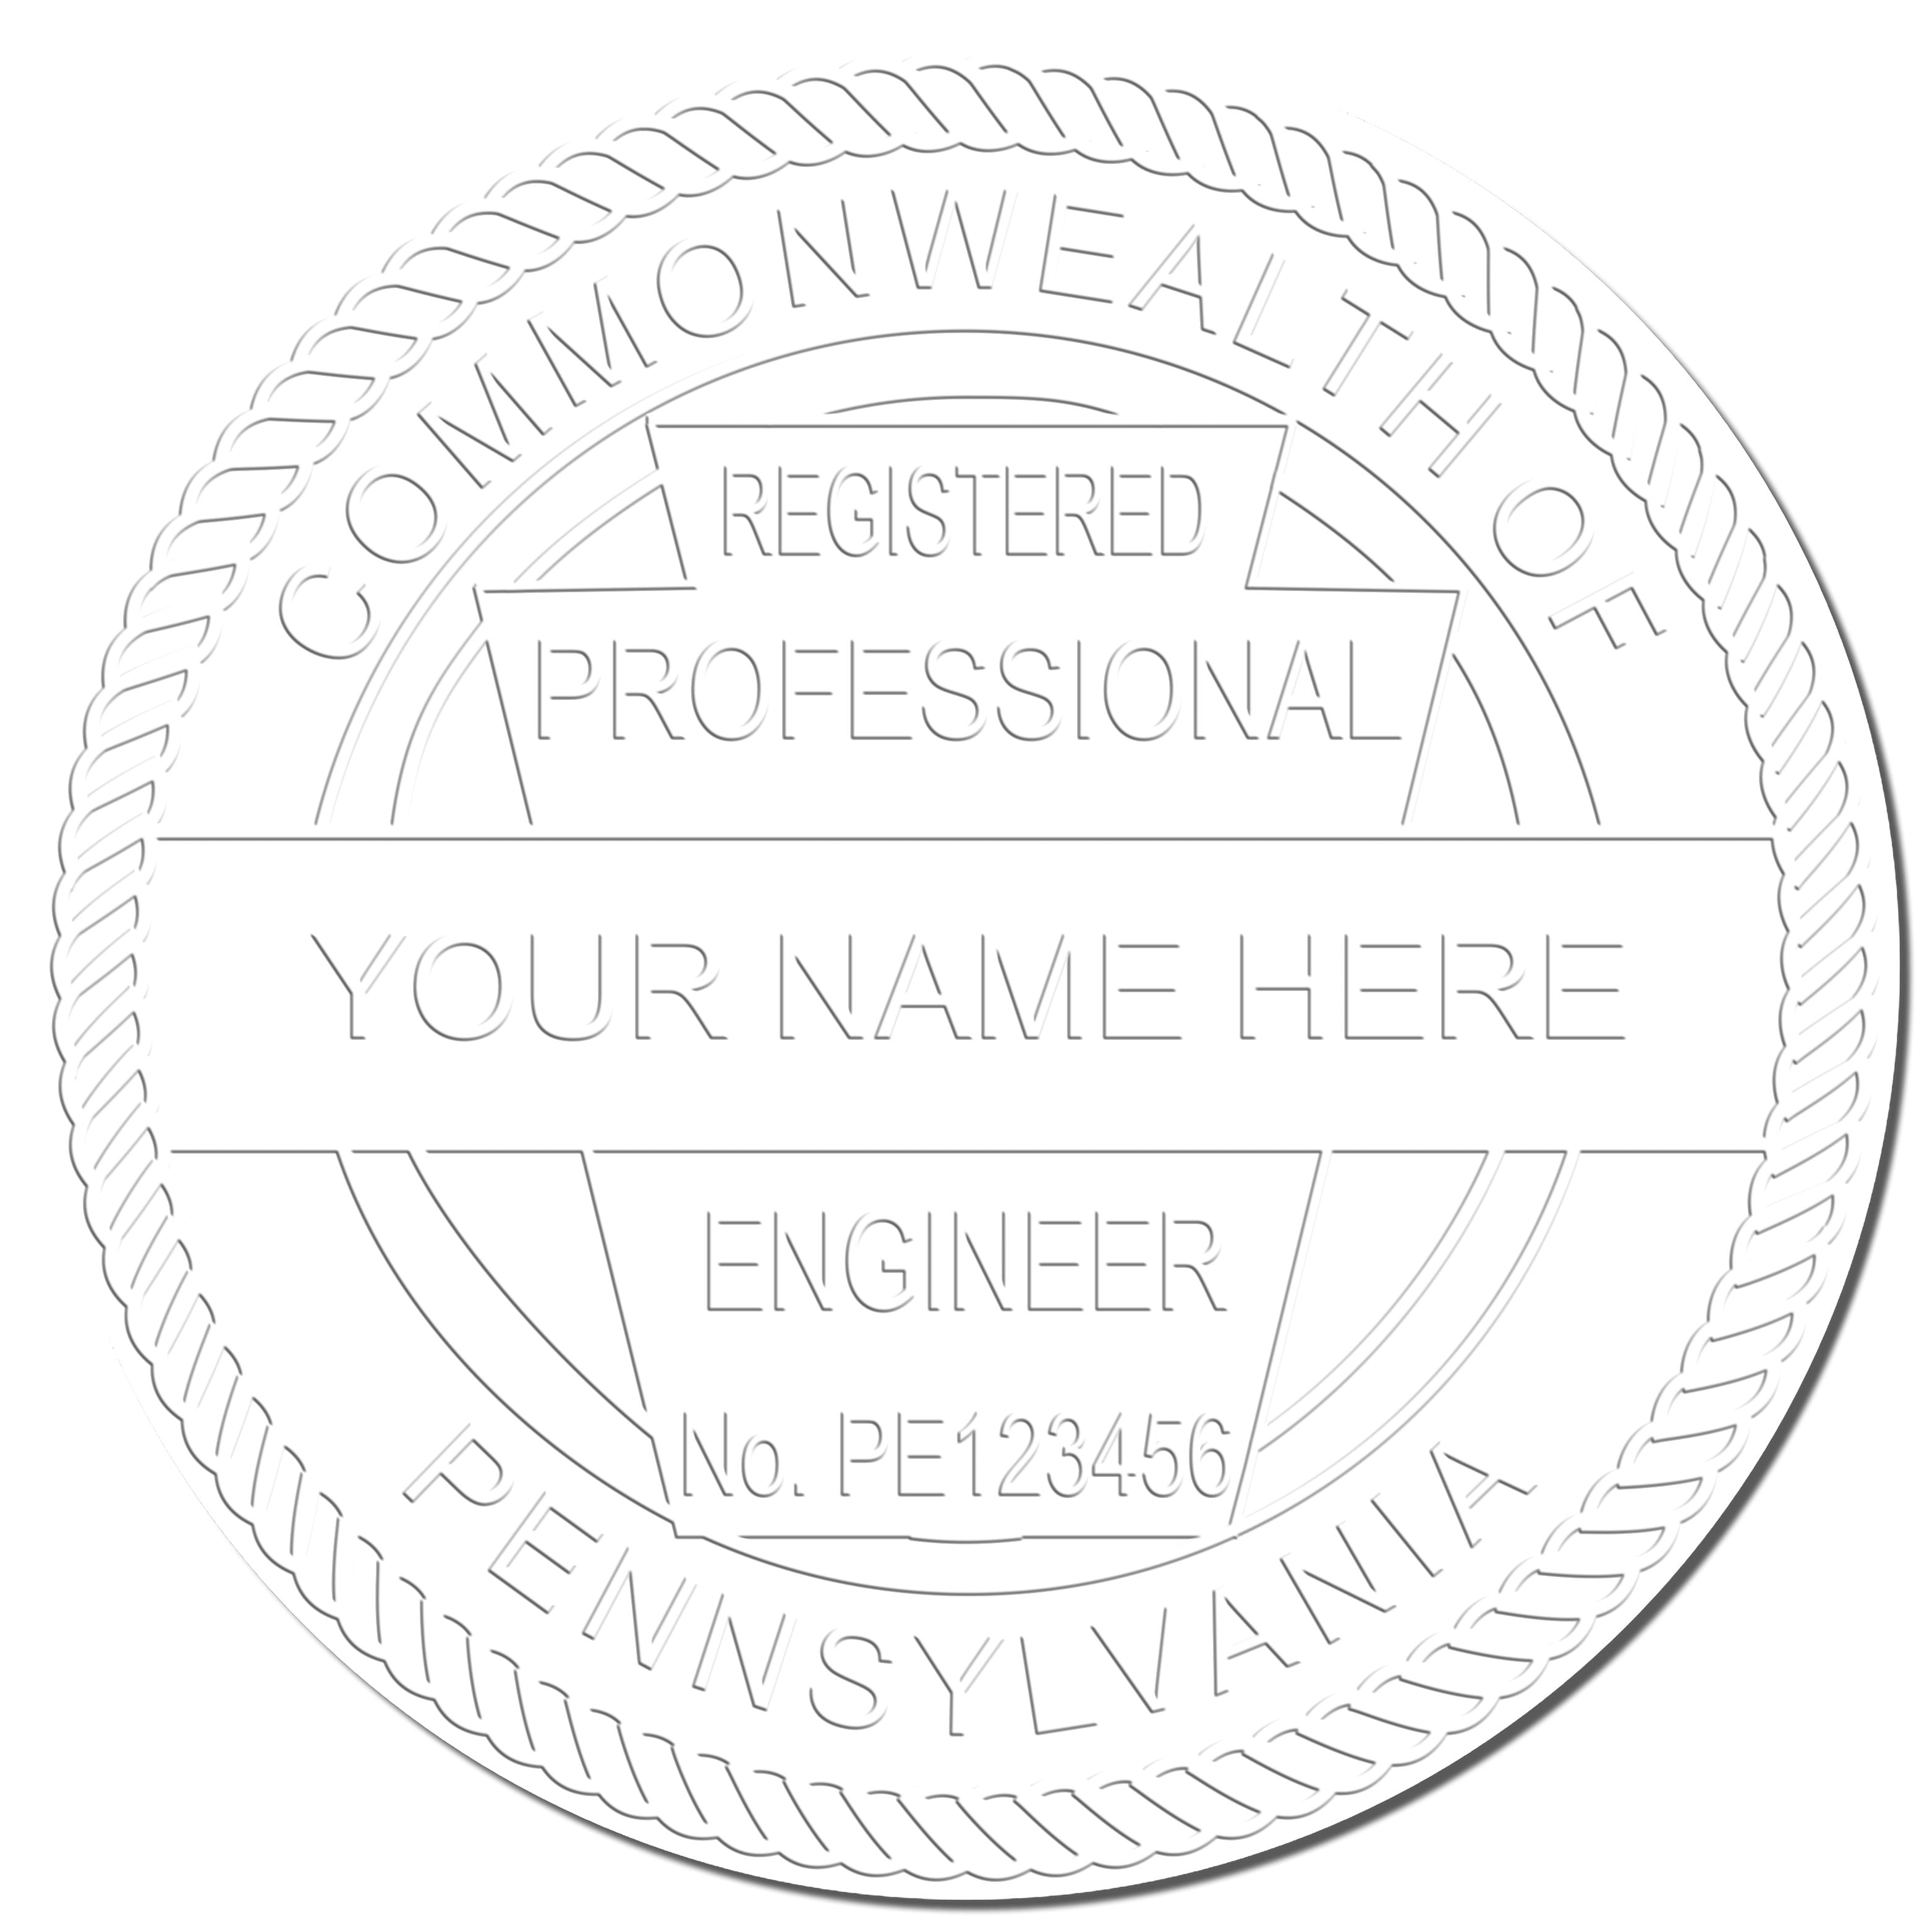 This paper is stamped with a sample imprint of the Hybrid Pennsylvania Engineer Seal, signifying its quality and reliability.